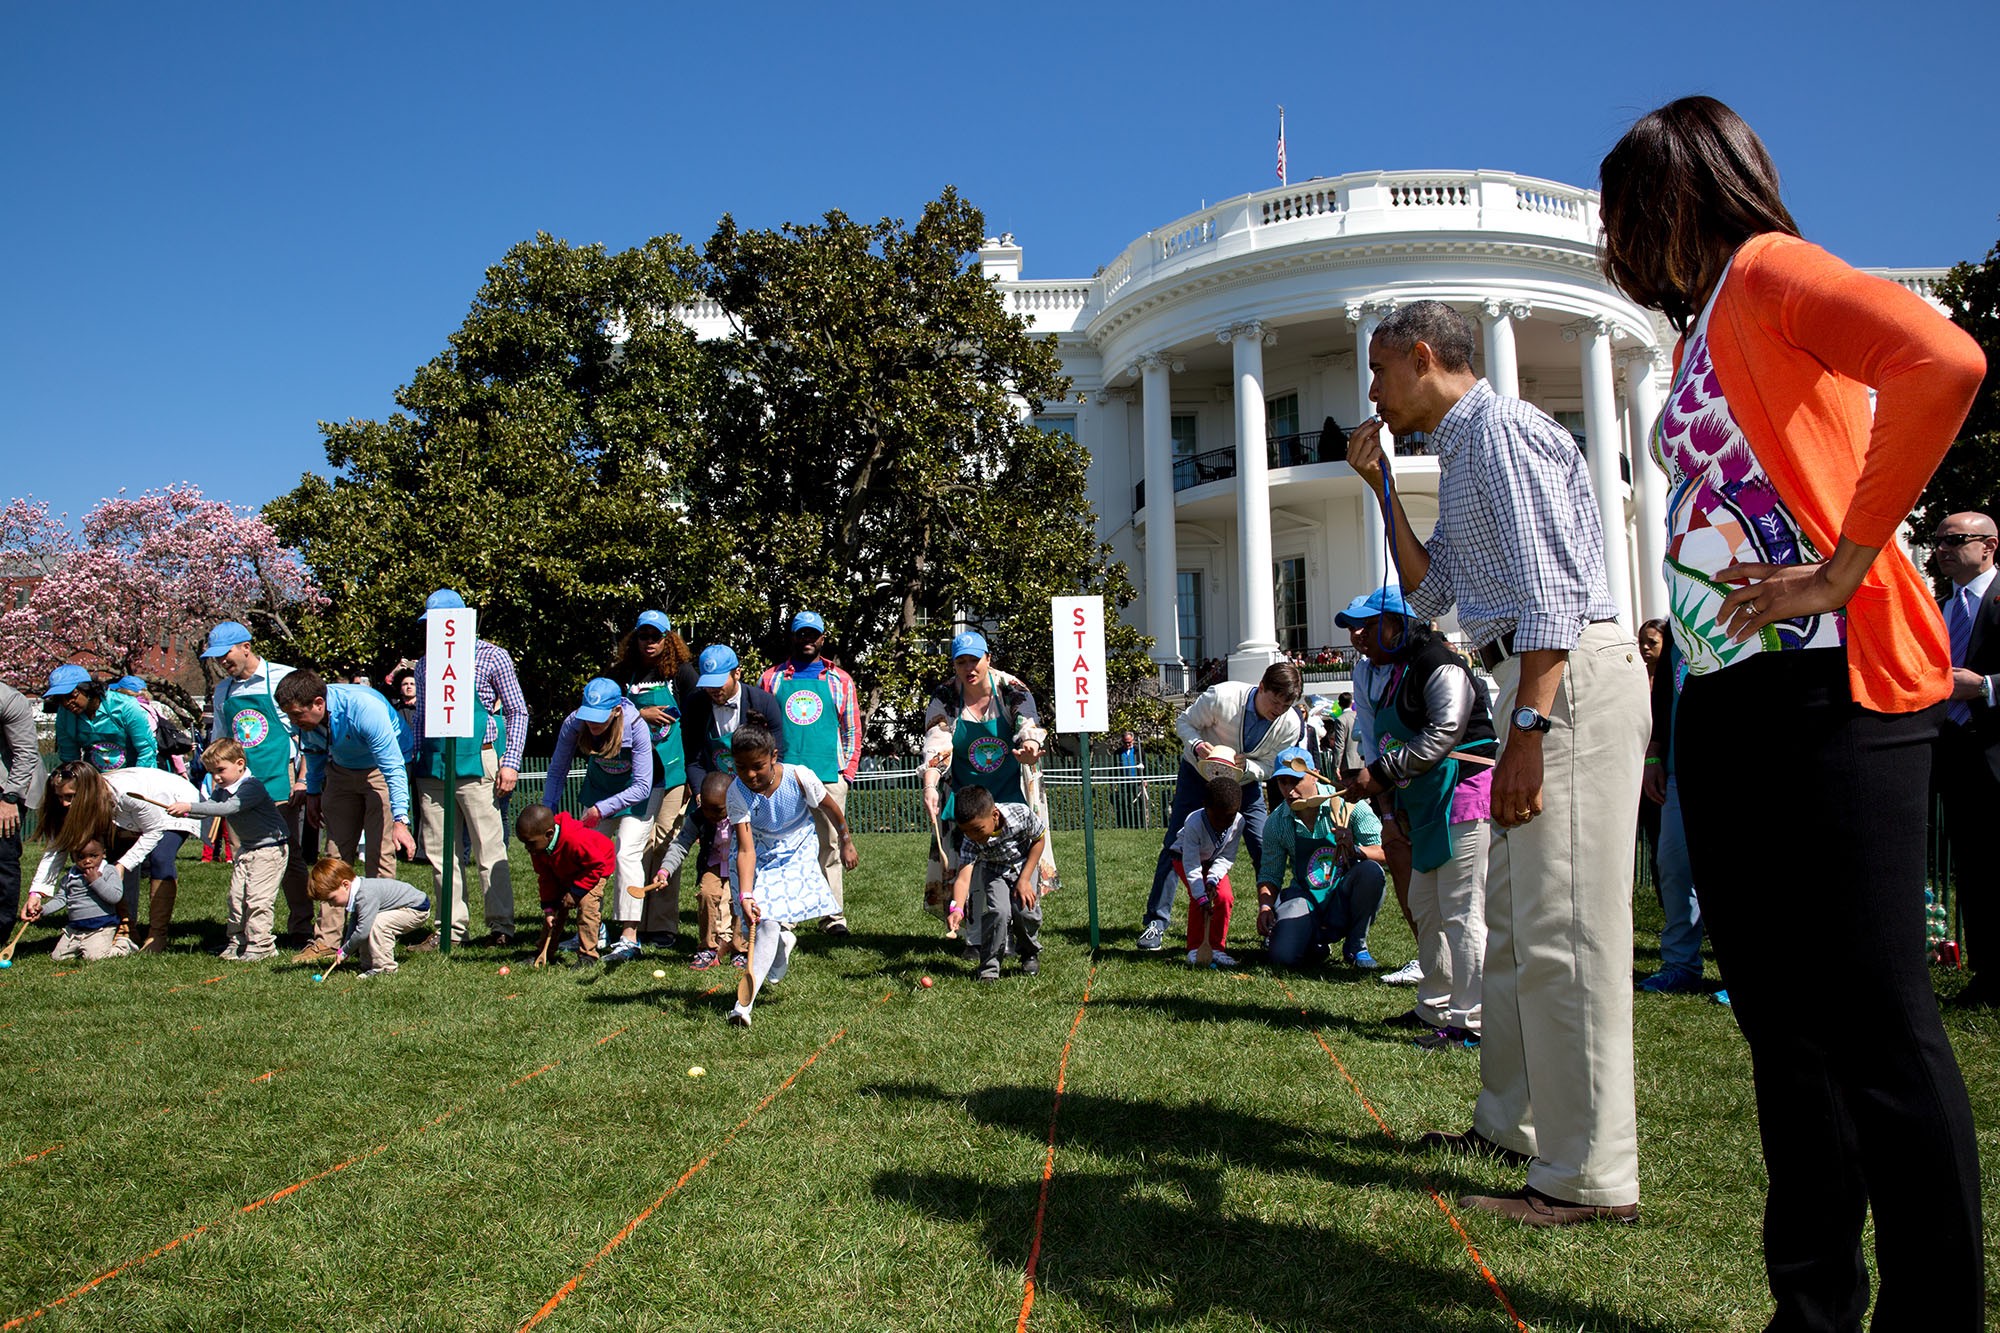 In Pictures The White House Easter Egg Roll whitehouse.gov